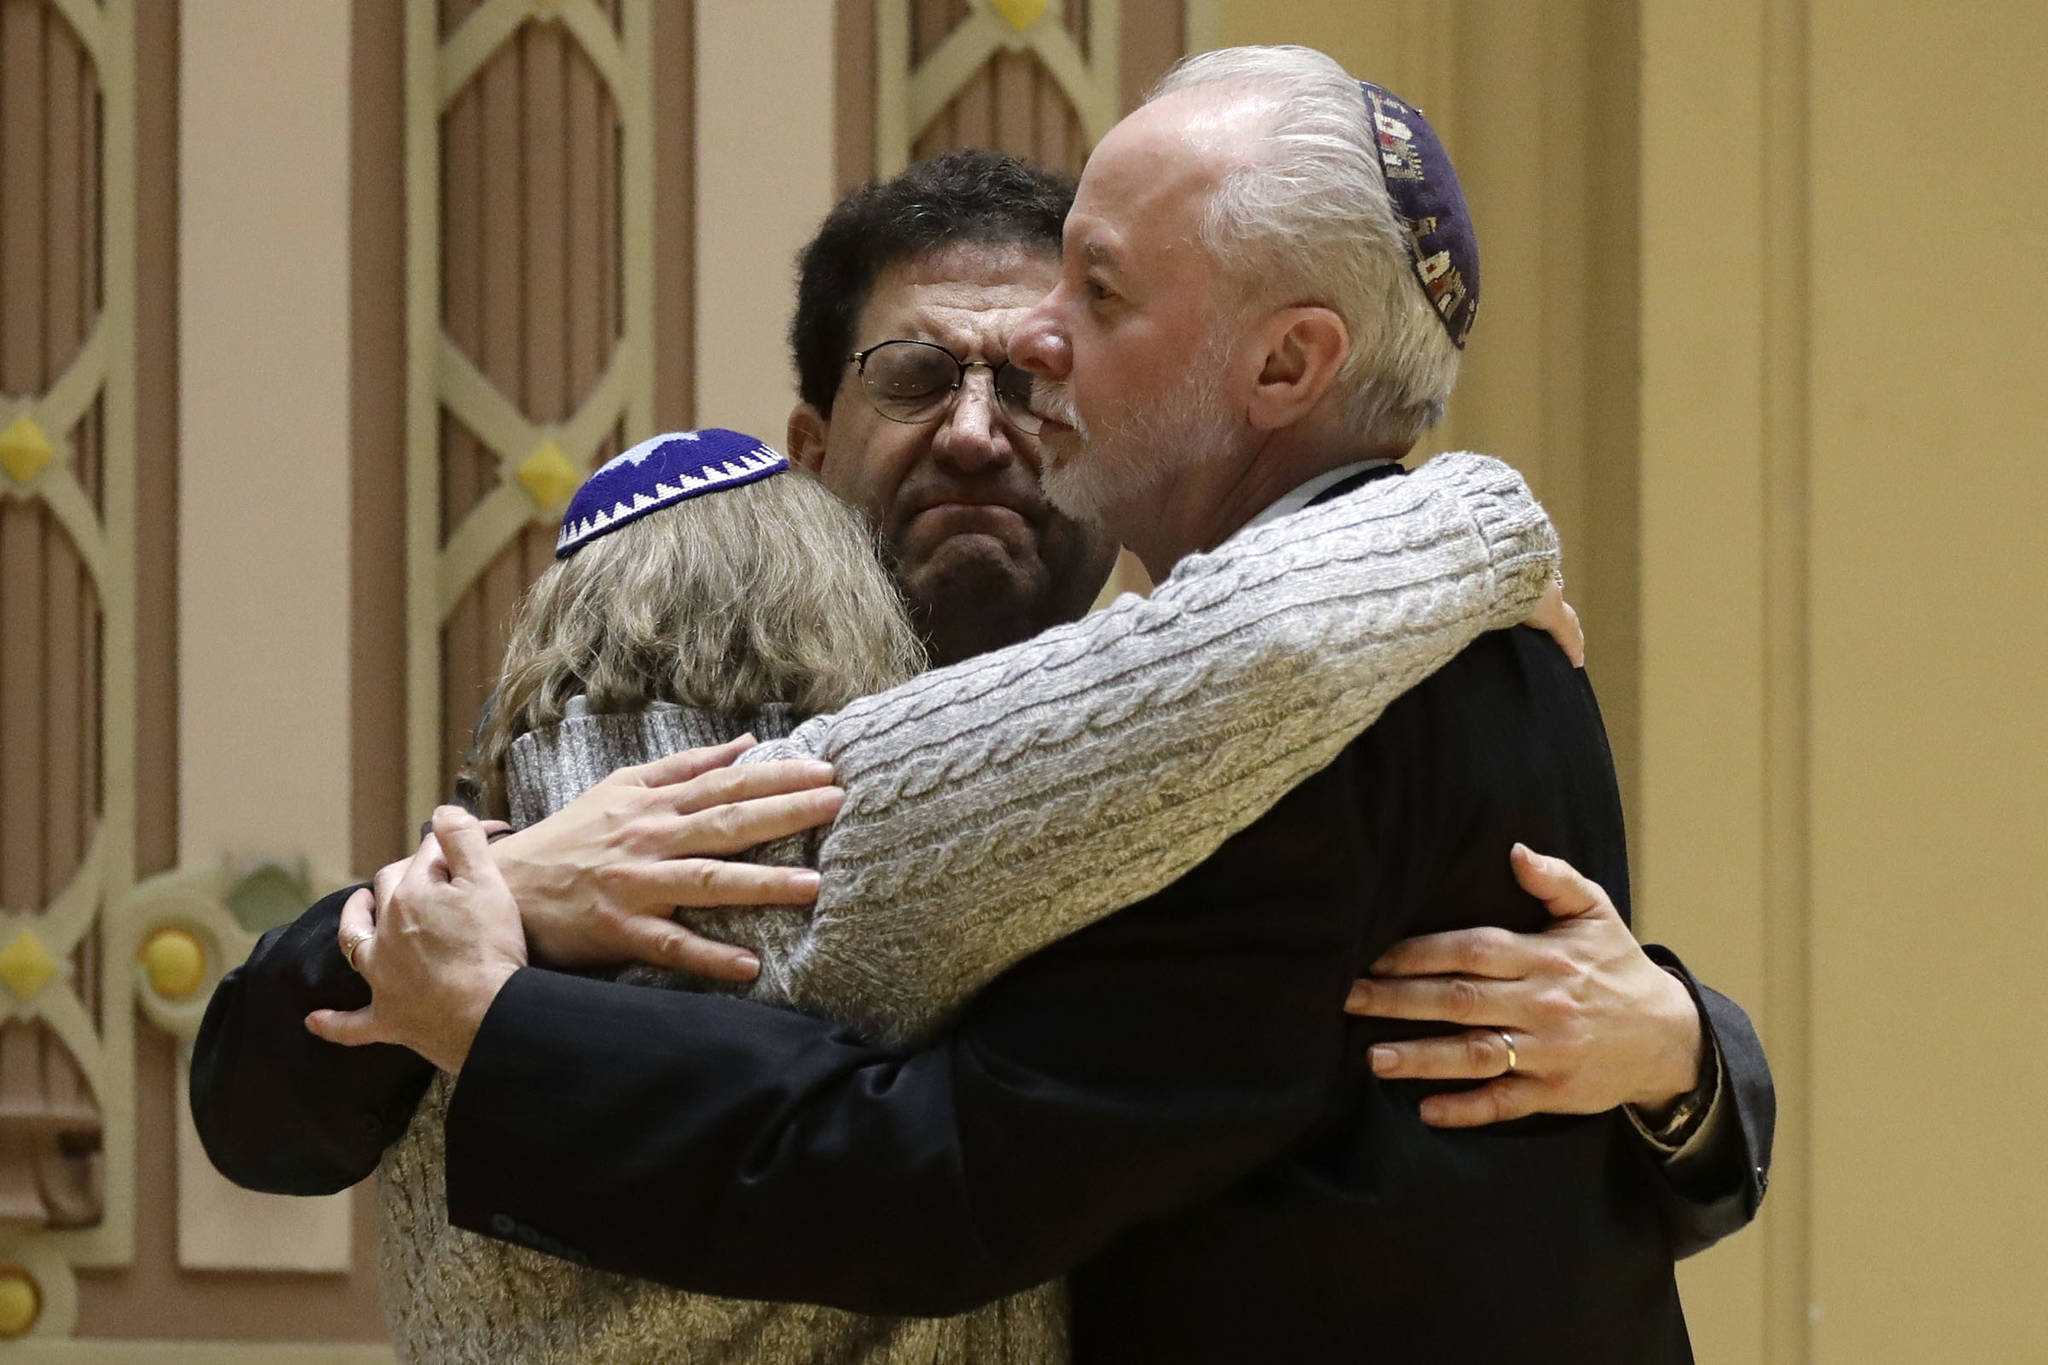 Opinion: Fight anti-semitism with love